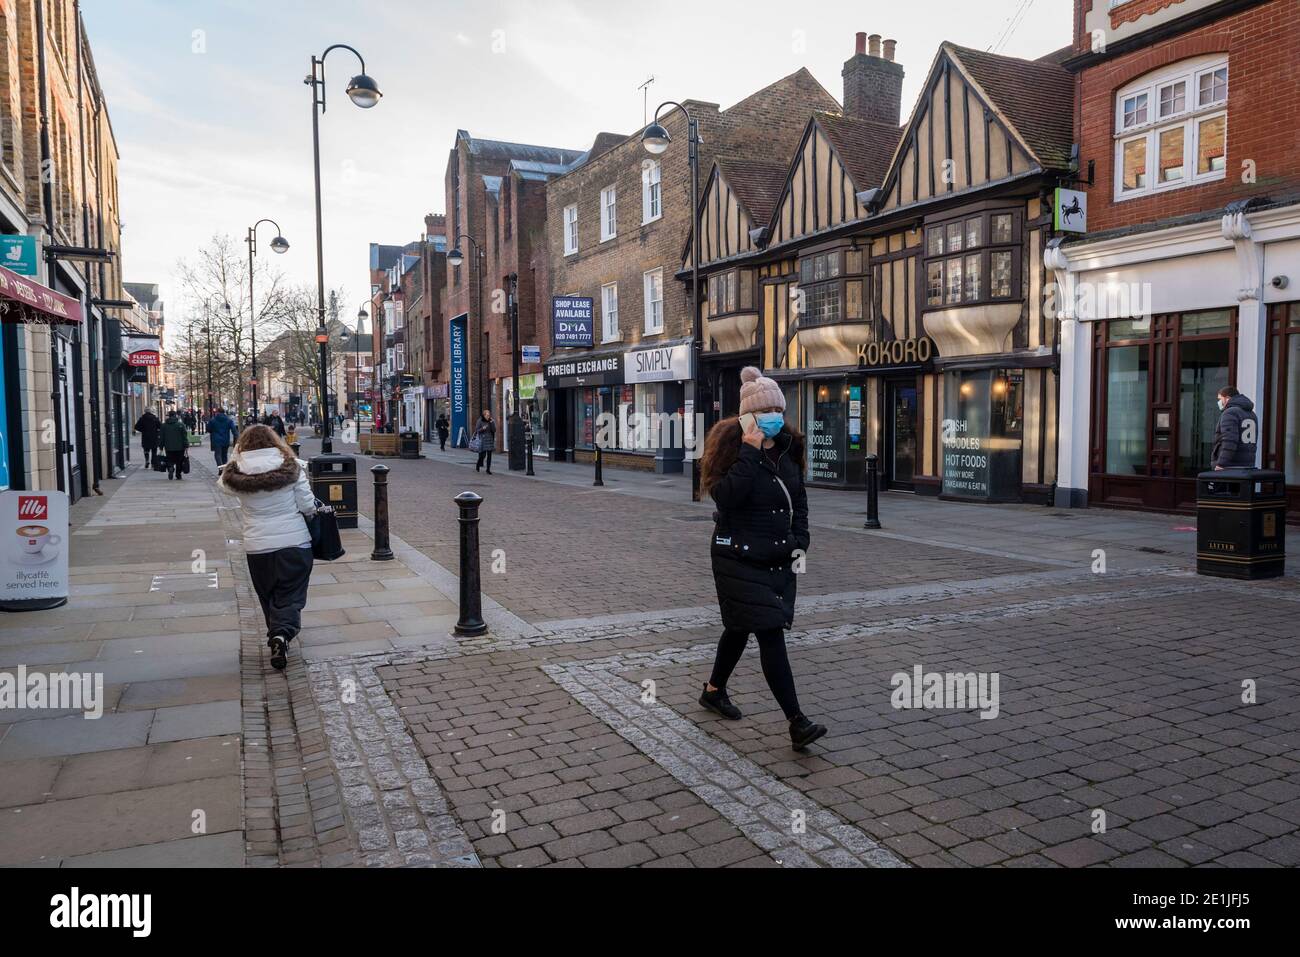 Uxbridge, UK.  7 January 2021. People in the high street in Uxbridge, north west London, on the morning that the third national lockdown came in to effect.  The UK government has imposed tougher restrictions in an effort to combat a recently discovered variant strain as the number of Covid-19 related deaths and coronavirus cases continues to increase.  Boris Johnson, Prime Minister, is MP for the constituency of Uxbridge and South Ruislip.  Credit: Stephen Chung / Alamy Live News Stock Photo